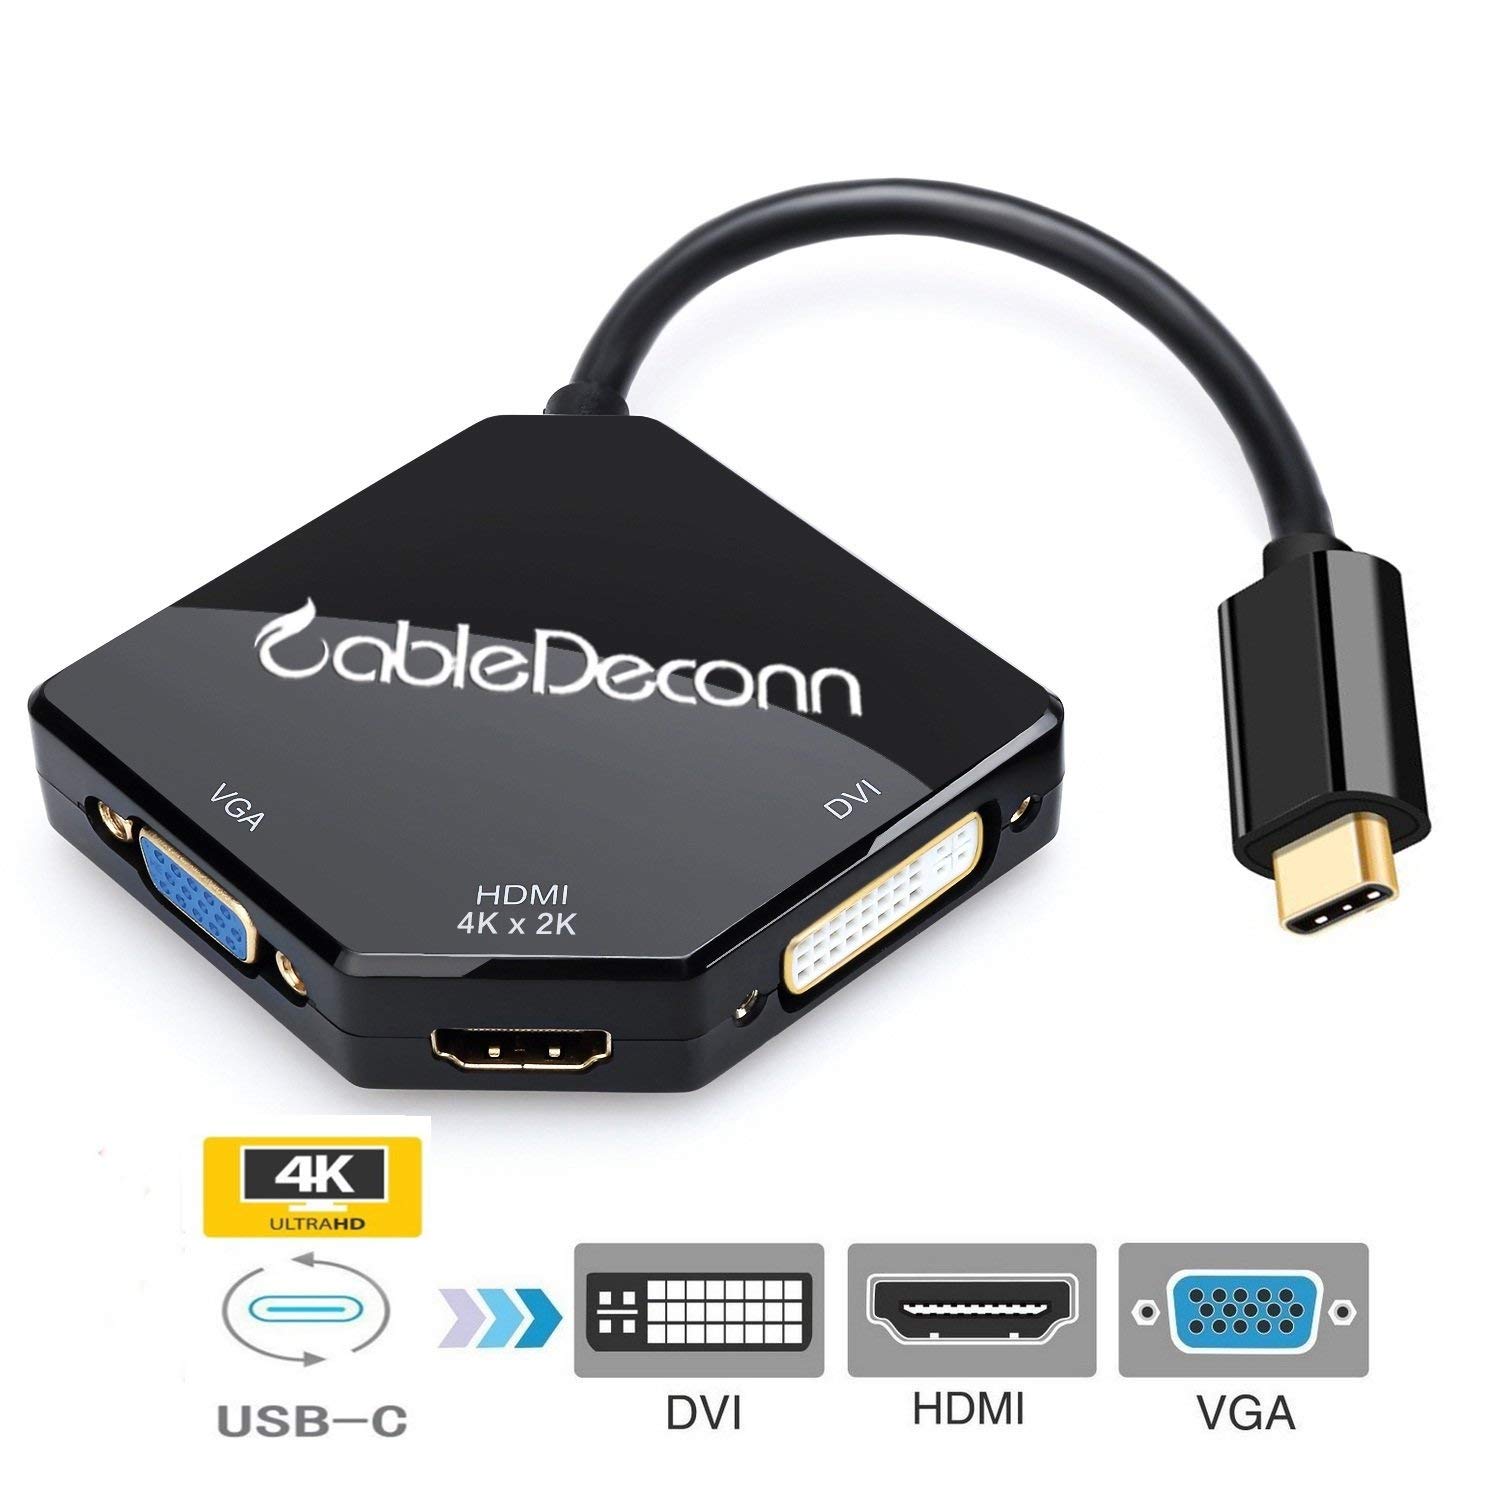 USB-C to HDMI VGA DVI Multiport Adapter,CableDeconn Thunderbolt 3 Type-c HDMI 4K 3IN1 Multifunction Cable Converter   F0102